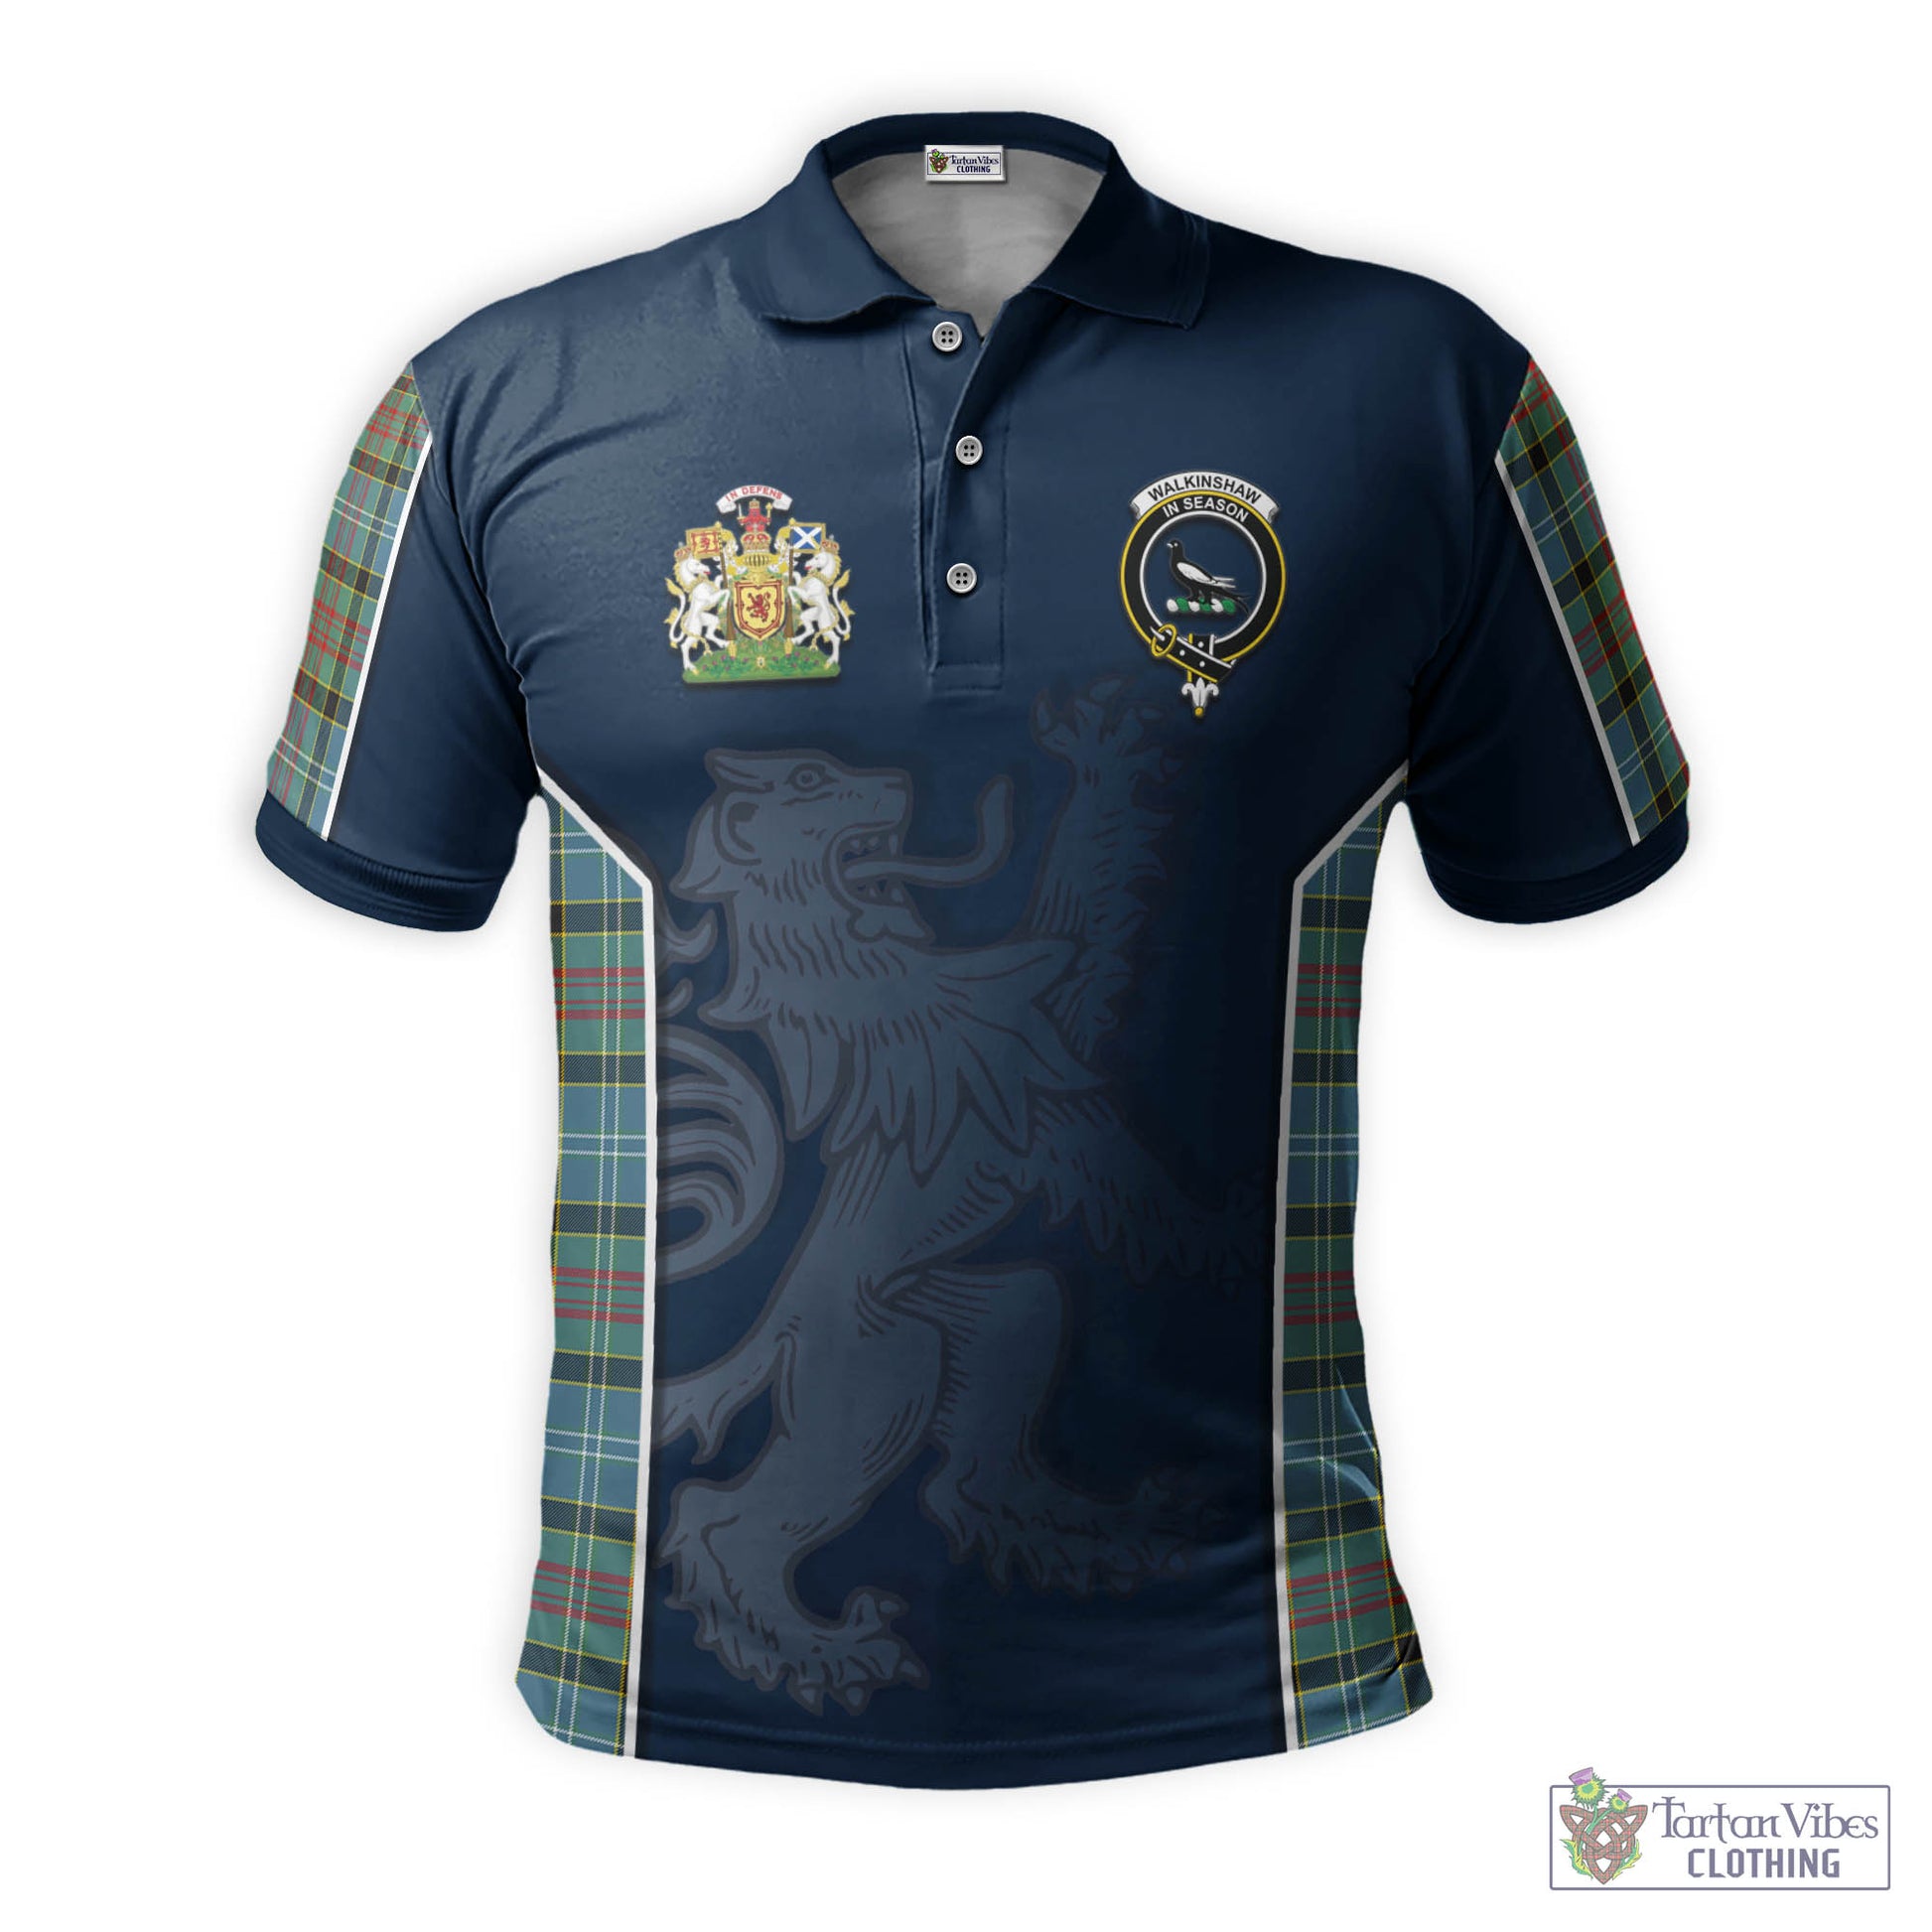 Tartan Vibes Clothing Walkinshaw Tartan Men's Polo Shirt with Family Crest and Lion Rampant Vibes Sport Style